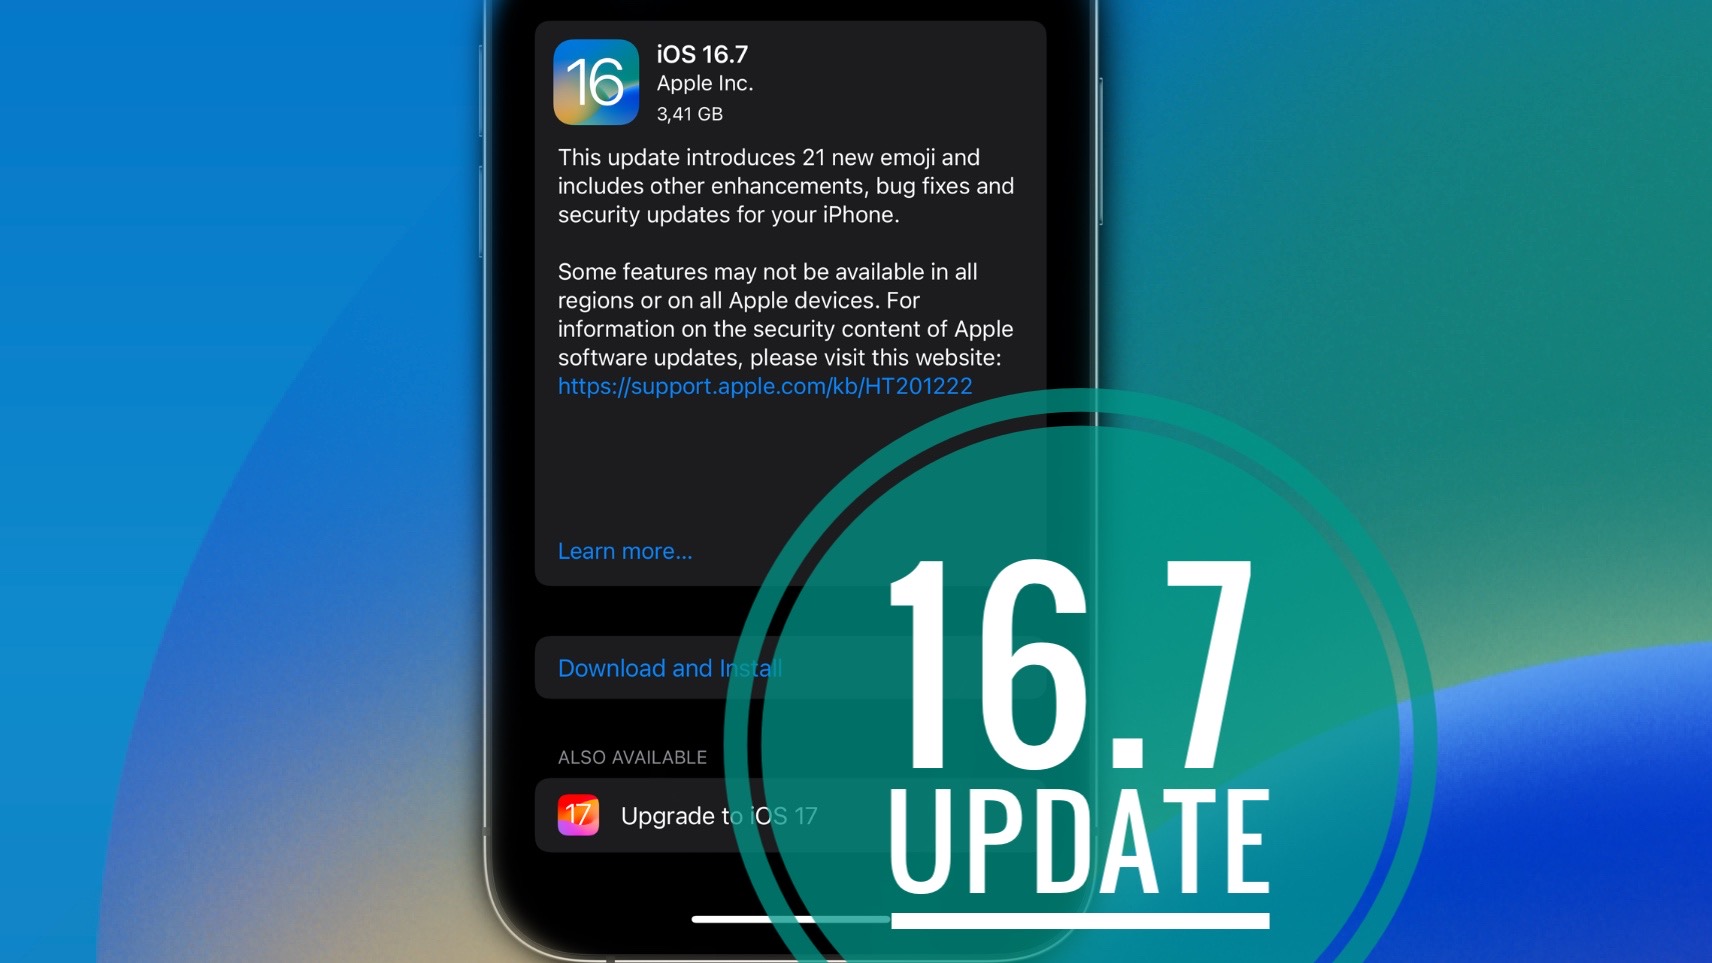 Apple has recently released iOS 16.7